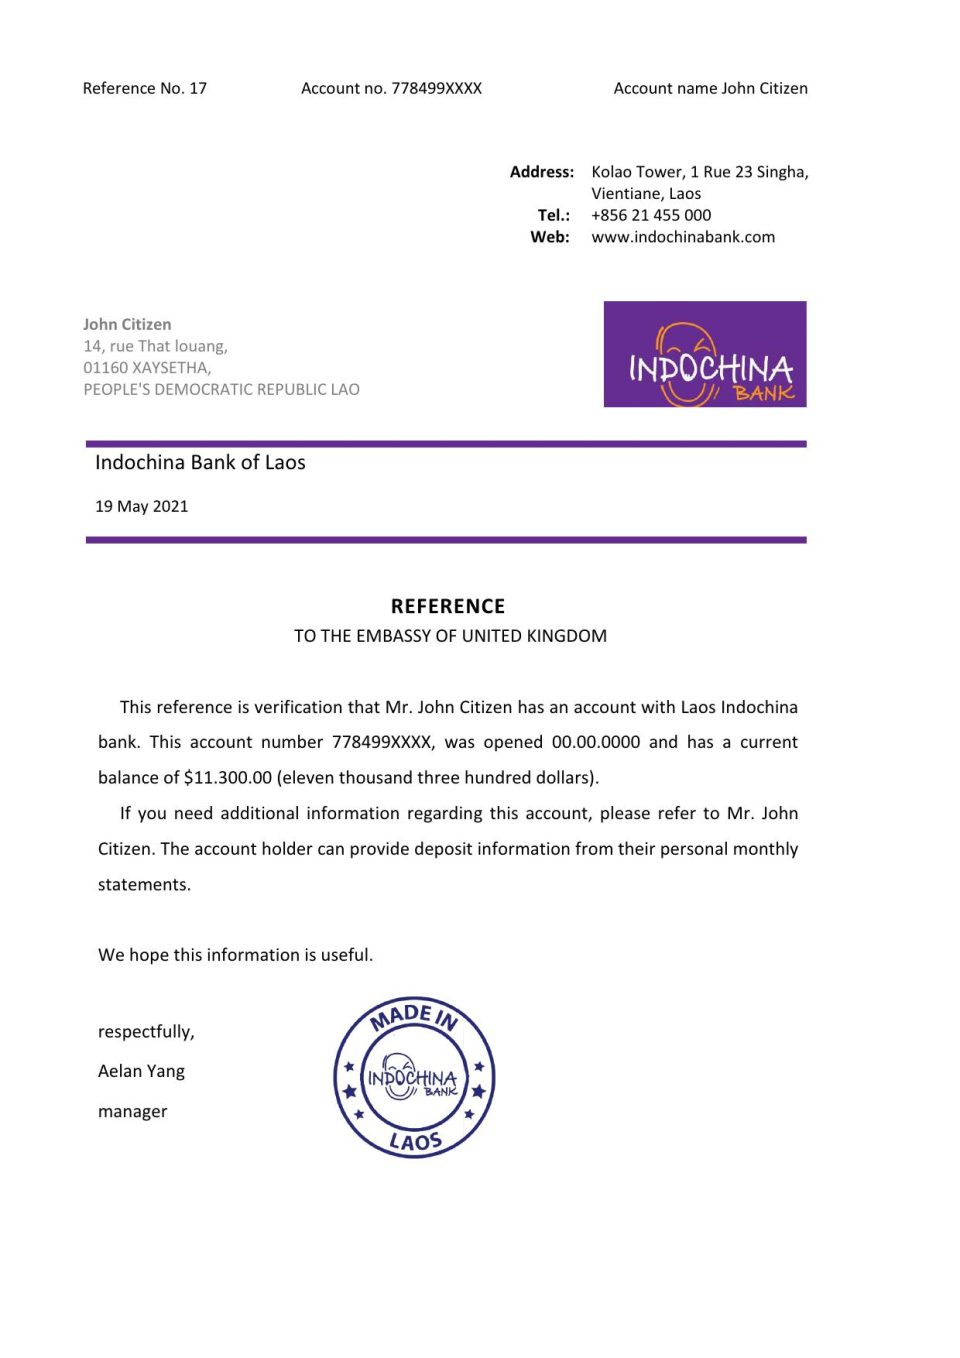 Download Laos Indochina Bank Reference Letter Templates | Editable Word